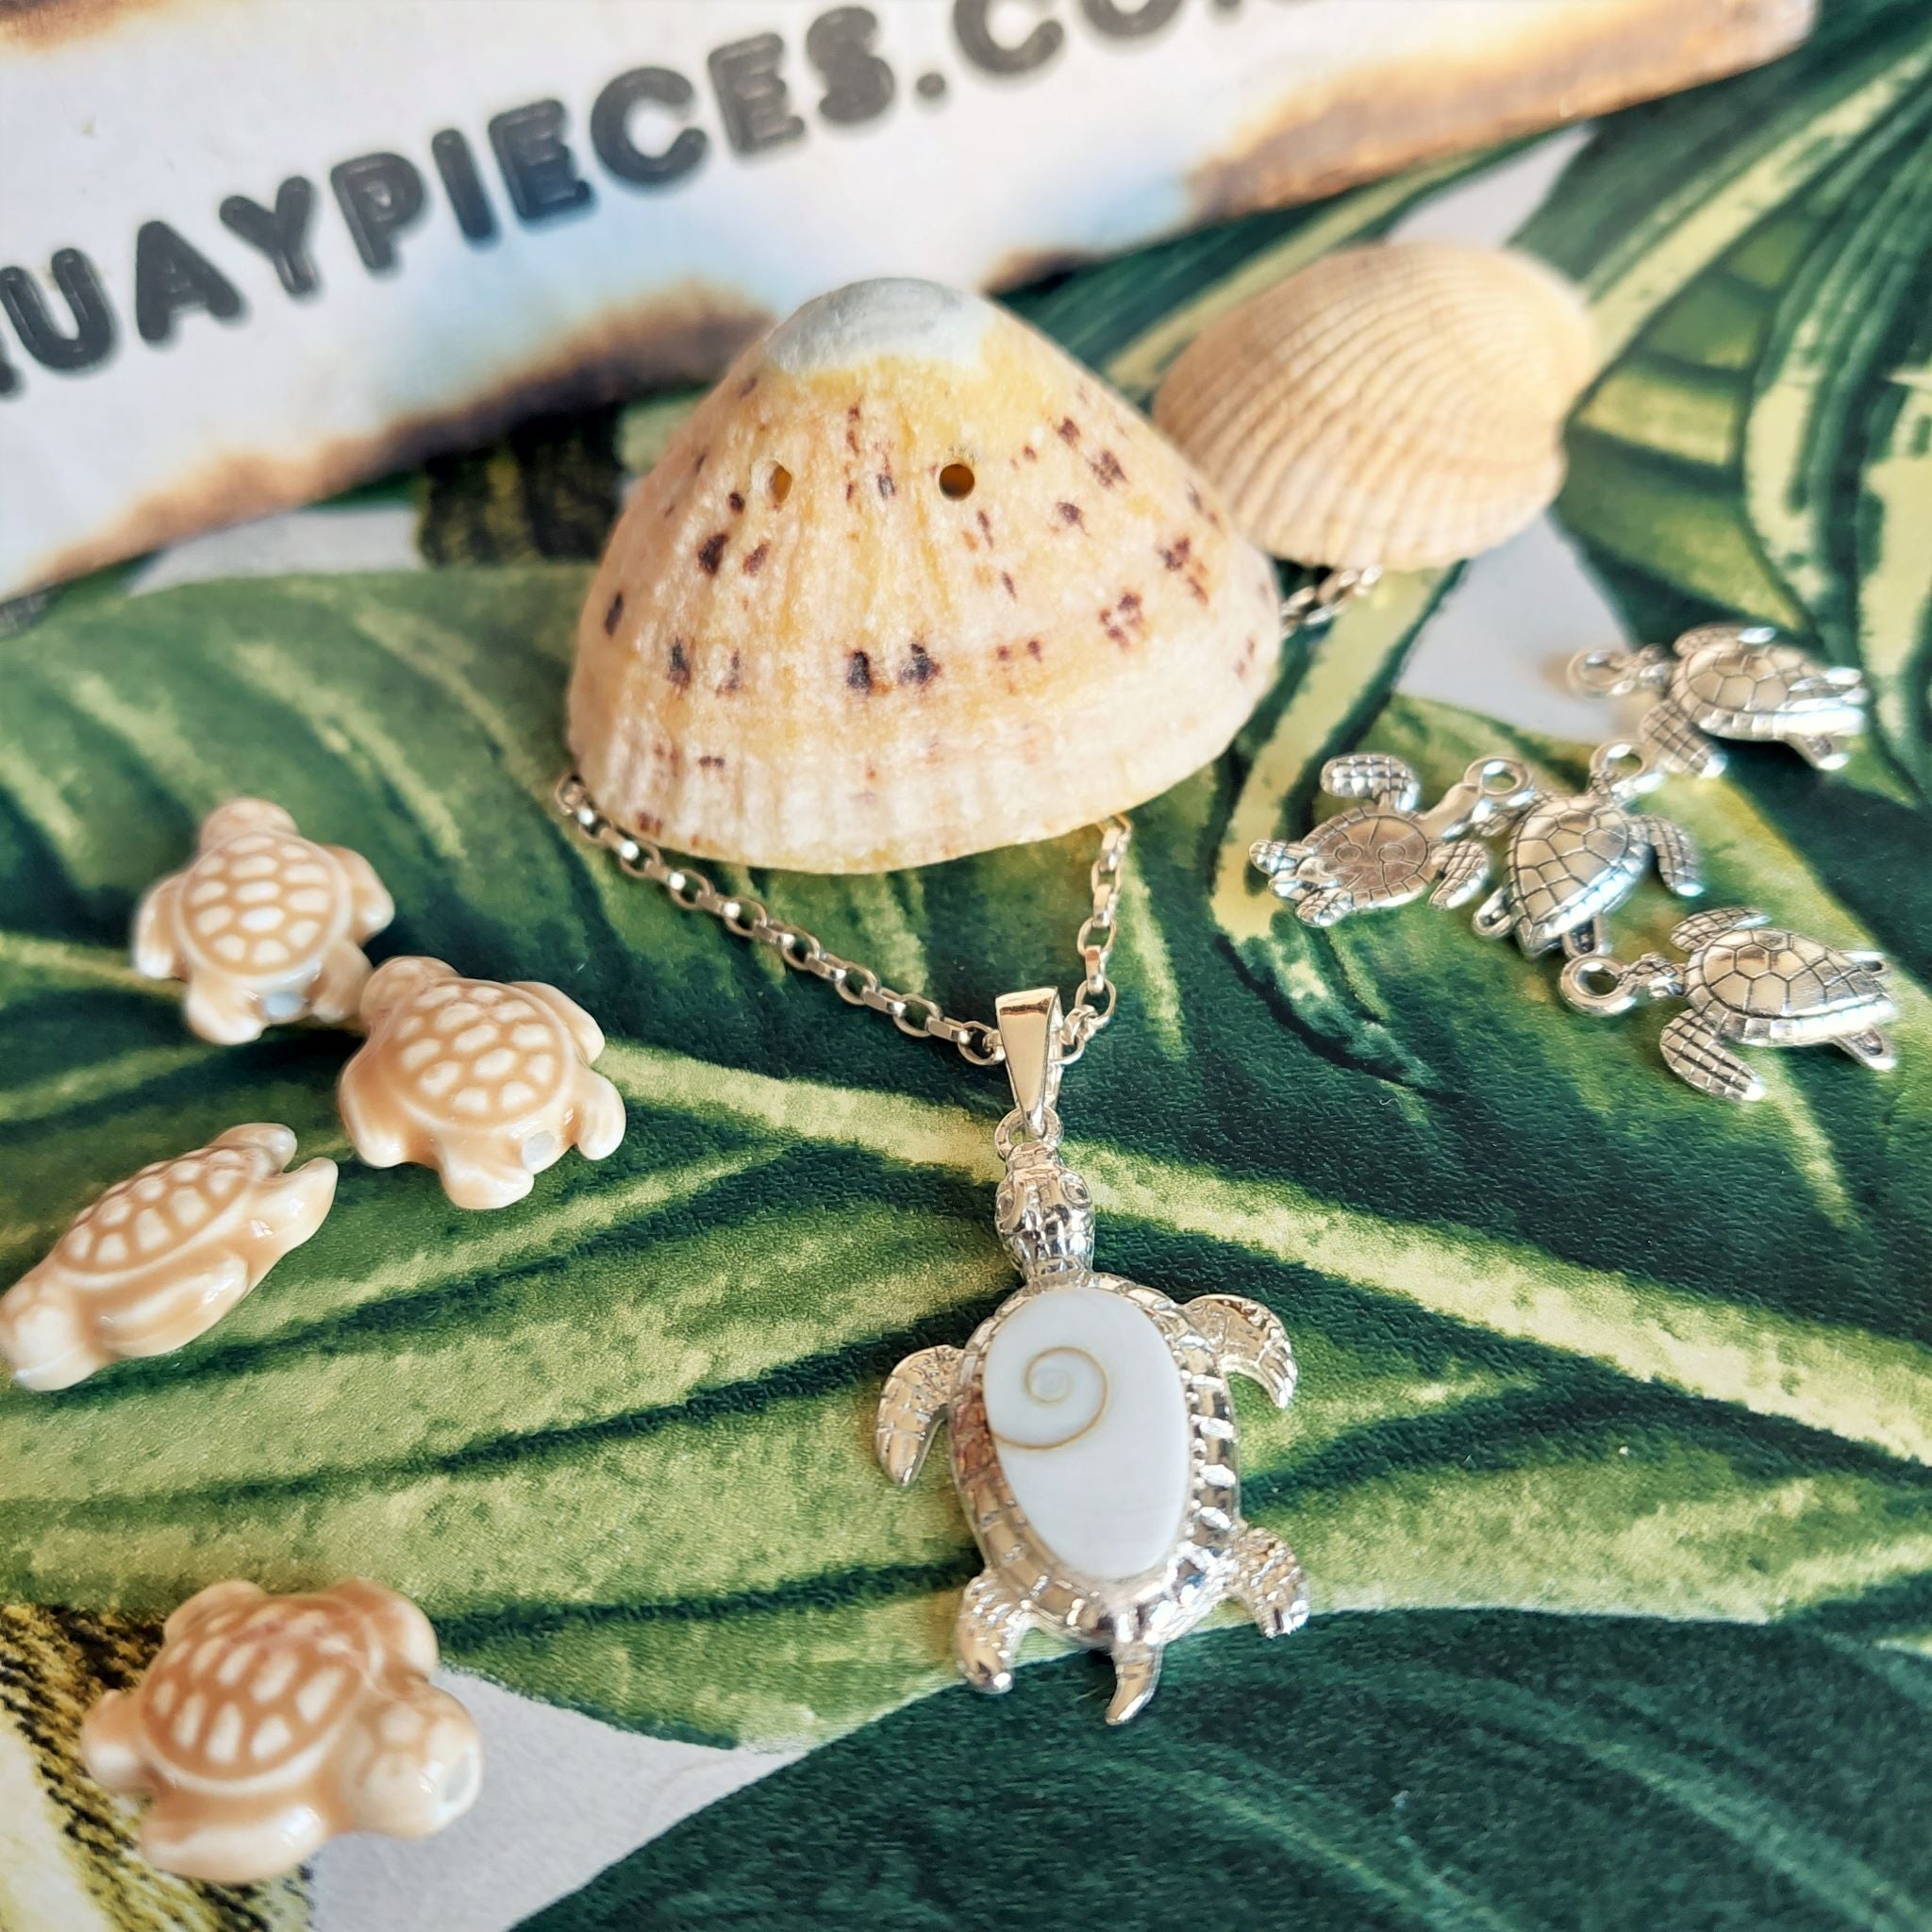 ﻿925 Hall Marked Silver Gorgeous White Turtle Pendant decorated with Shiva Shell, engraved outer edge & legs H 38 mm x W 30 mm Long 28" Sterling Silver curb chain with lobster clasp ﻿**Presented in lovely Kraft paper gift box with reusable organza pouch**